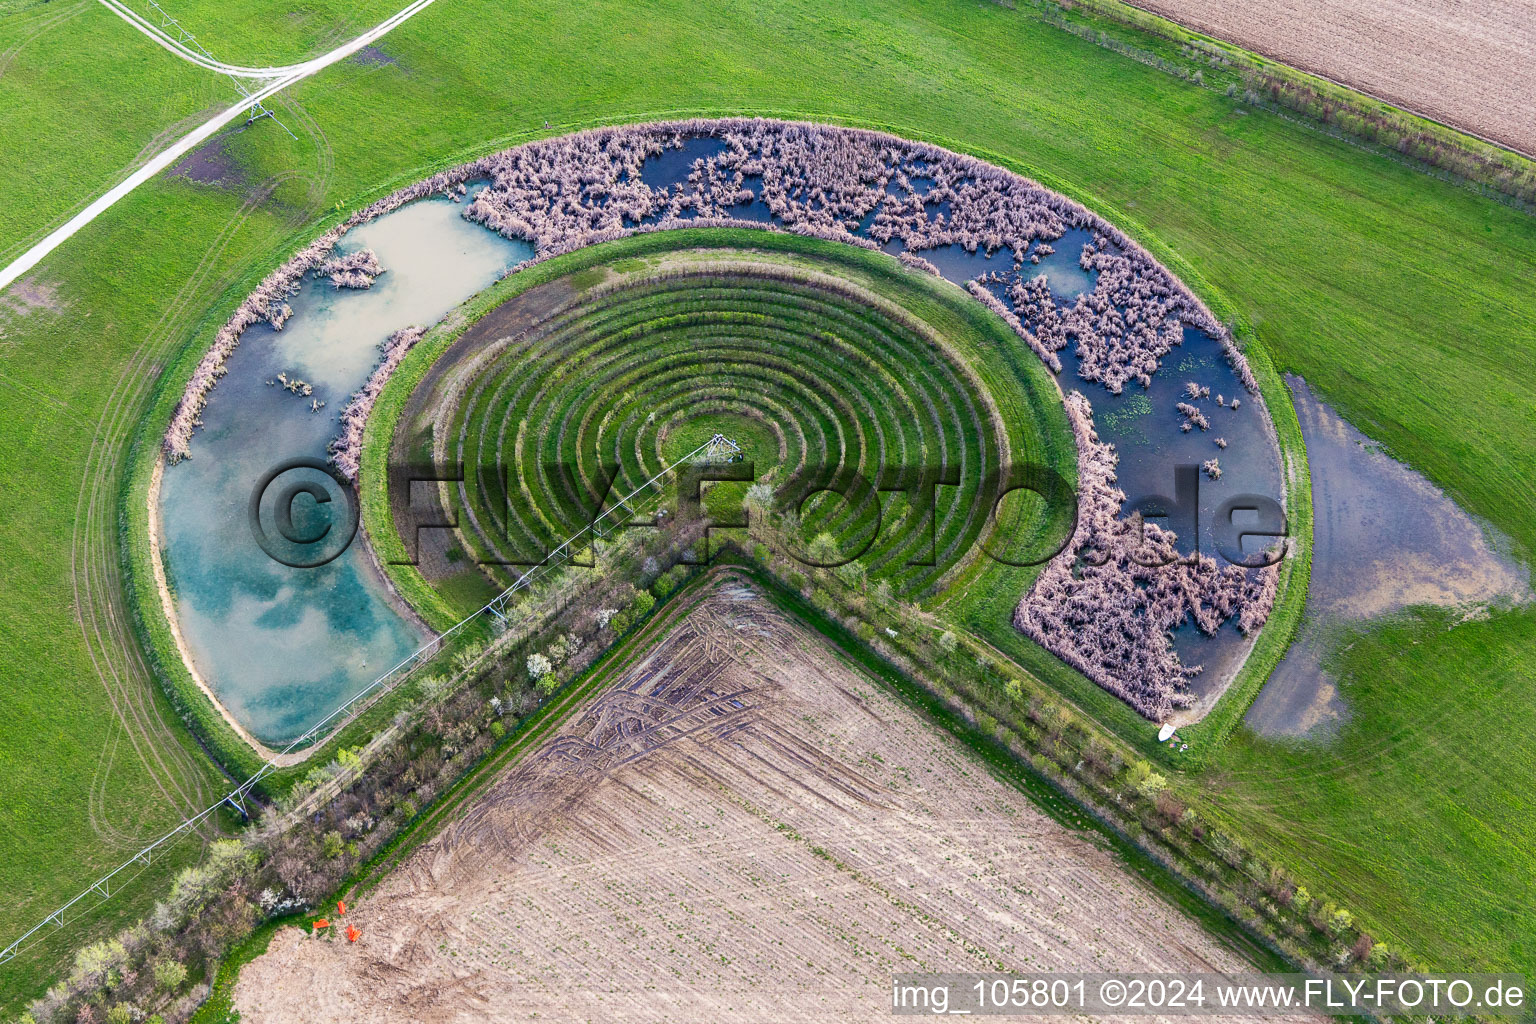 Circular round arch of a pivot irrigation system on agricultural fields in Pavia di Udine in Friuli-Venezia Giulia, Italy